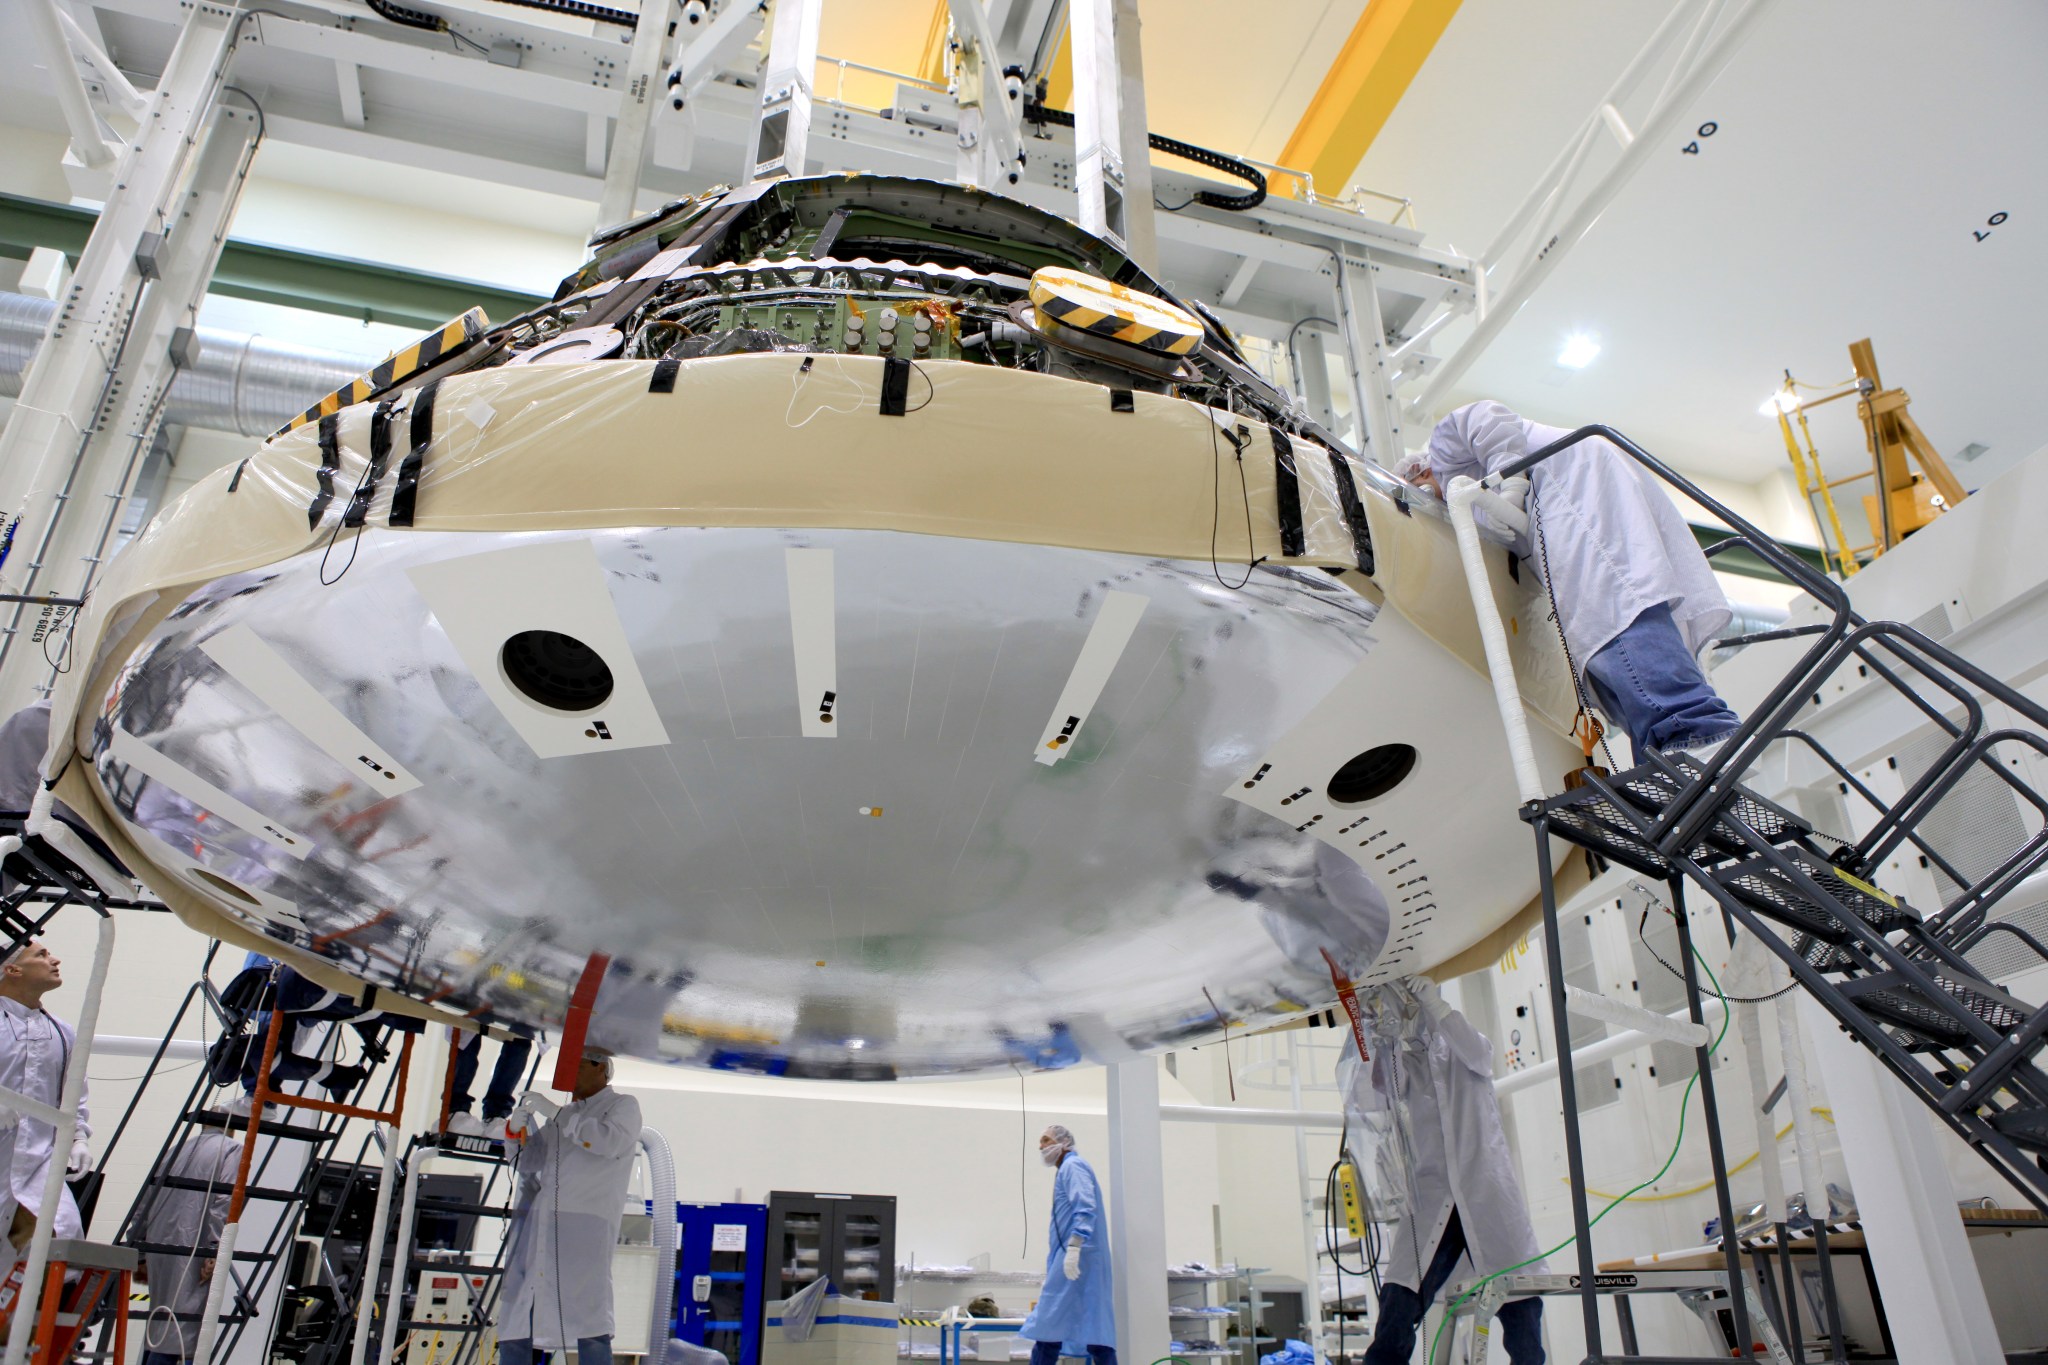 Orion, NASA's new exploration spacecraft, being prepared for its first flight test